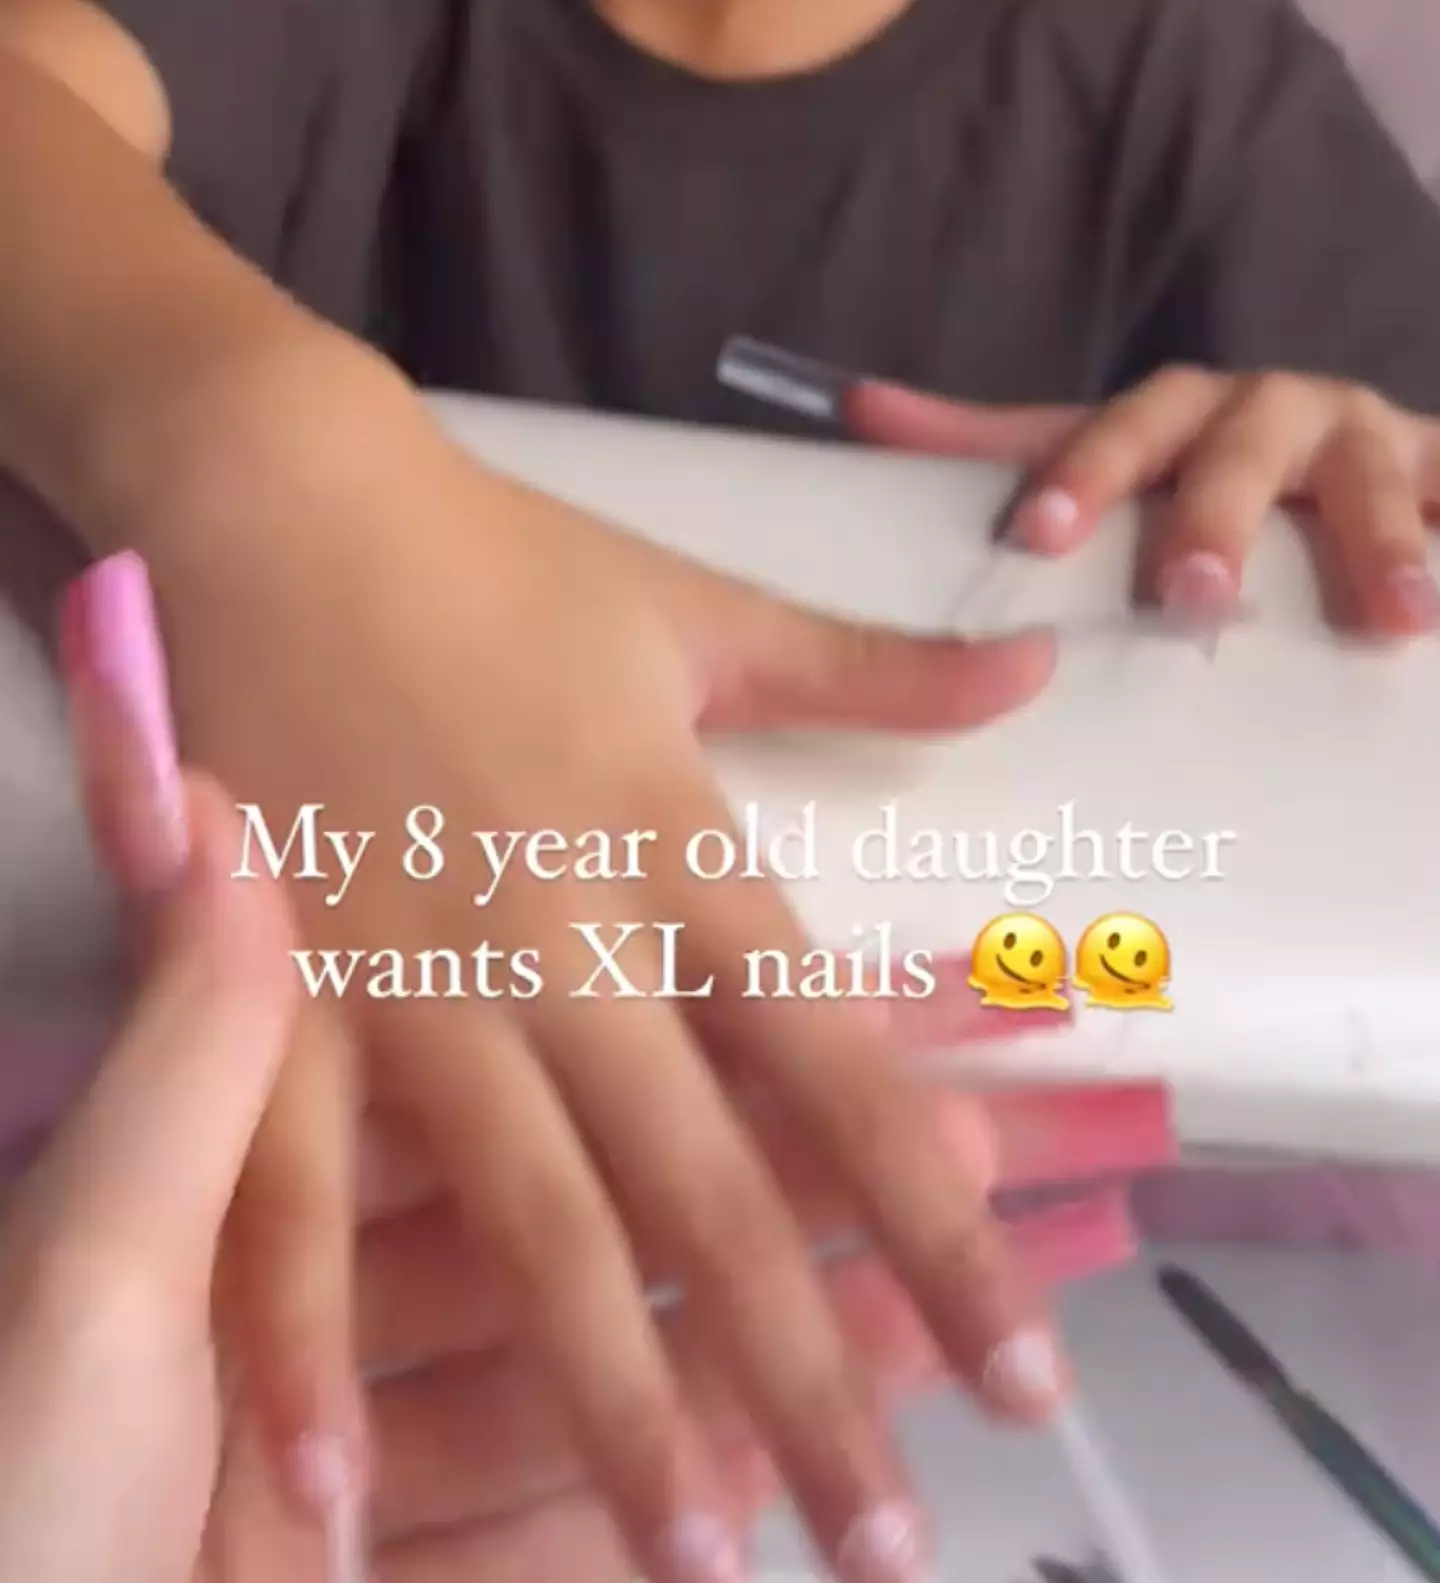 The mum filmed the process of doing her eight-year-old's birthday nails.